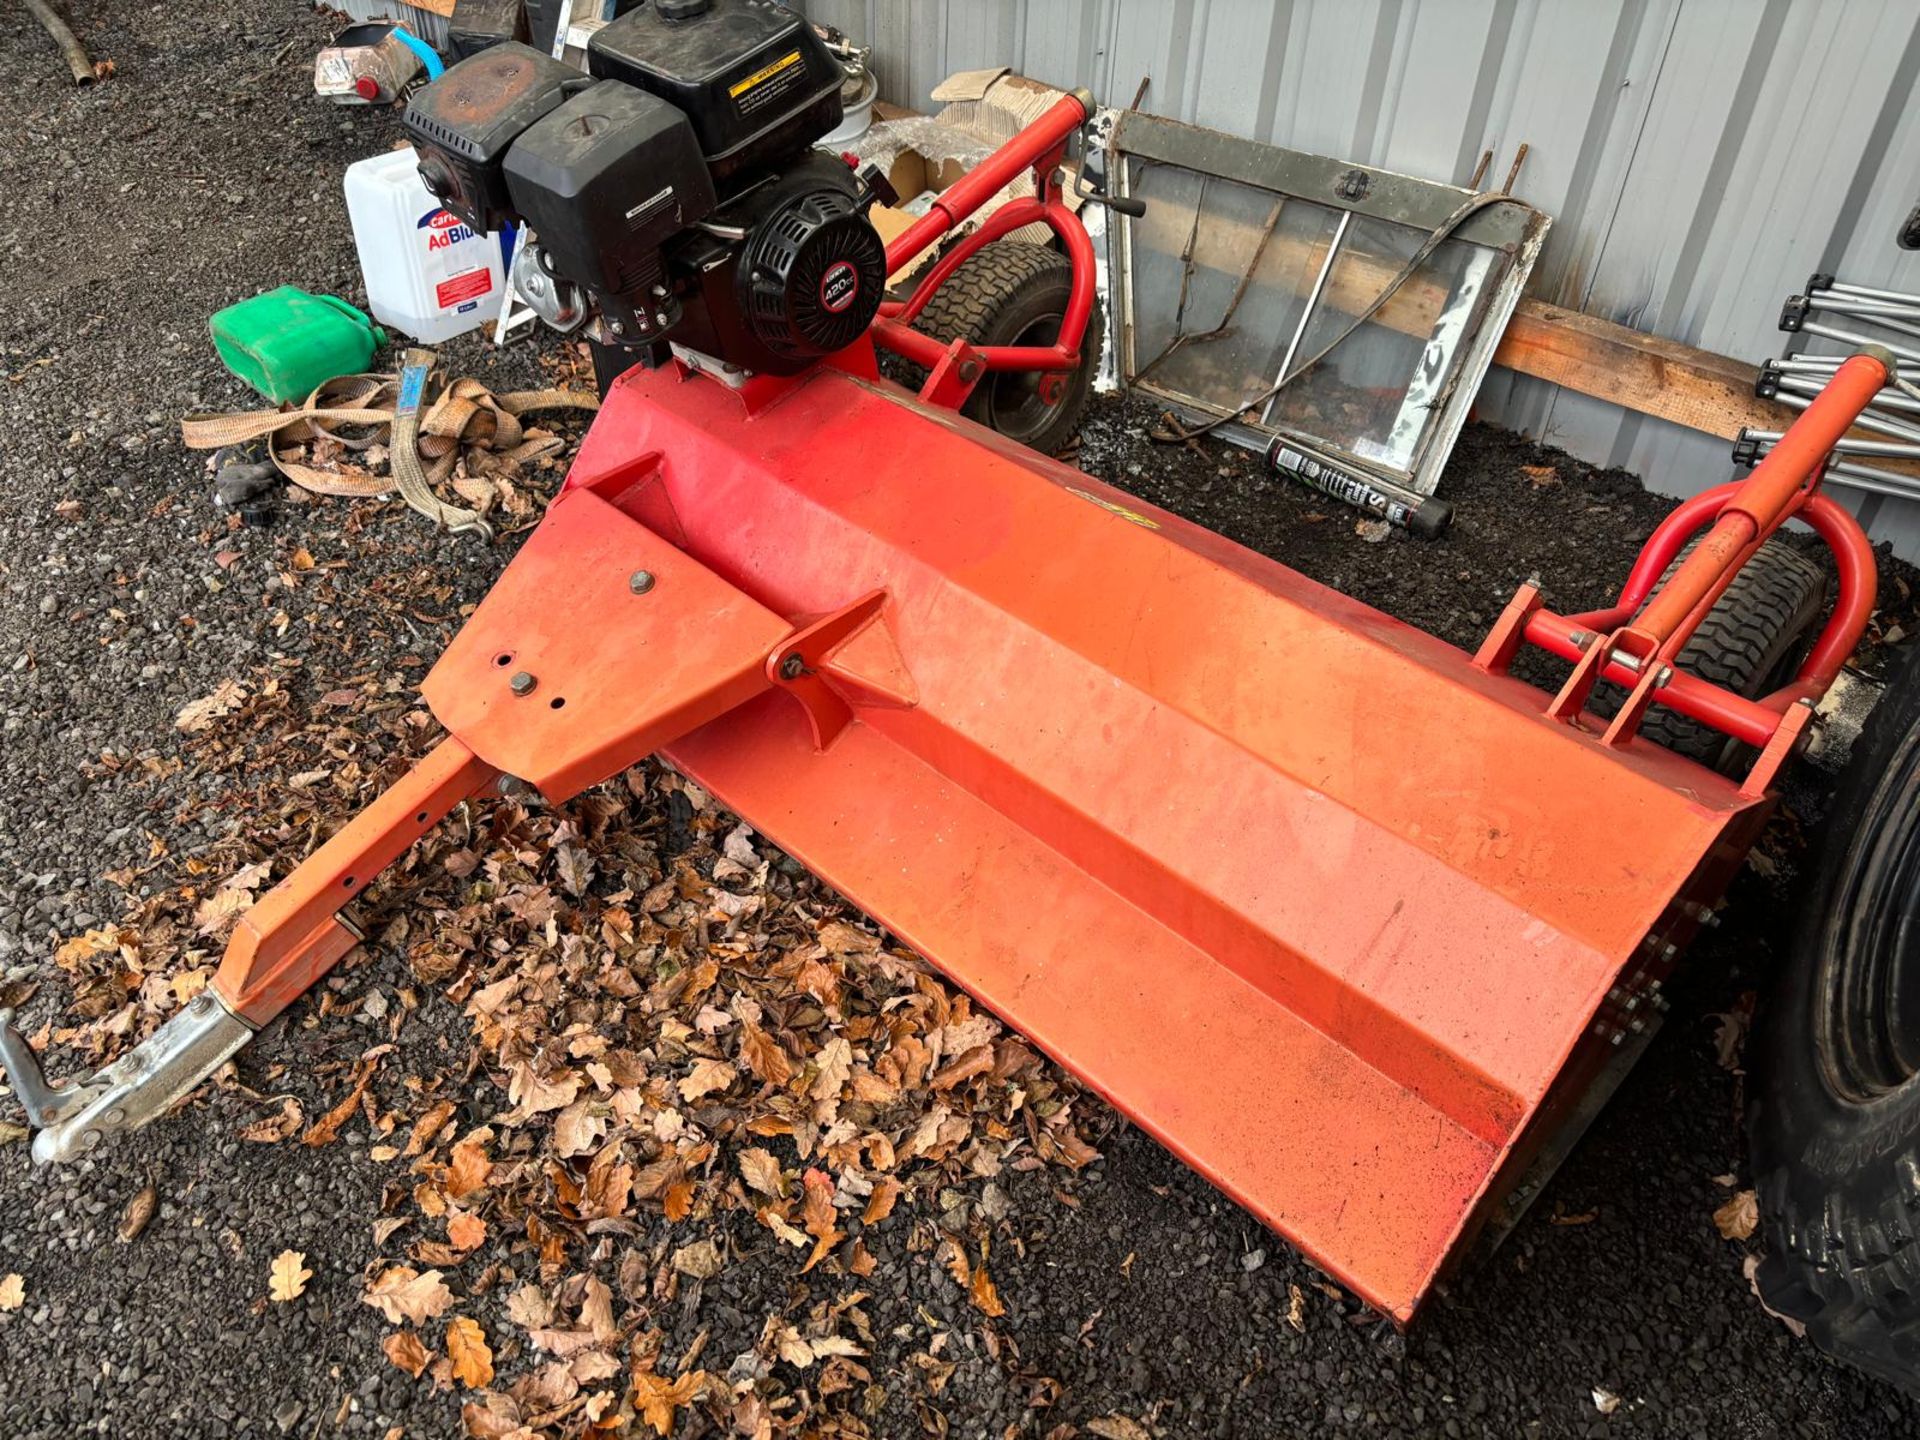 HIGH-PERFORMANCE ATV QUAD BIKE FLAIL MOWER: 4.5FT WIDE, 420CC ENGINE - EXCELLENT CONDITION! - Image 6 of 7